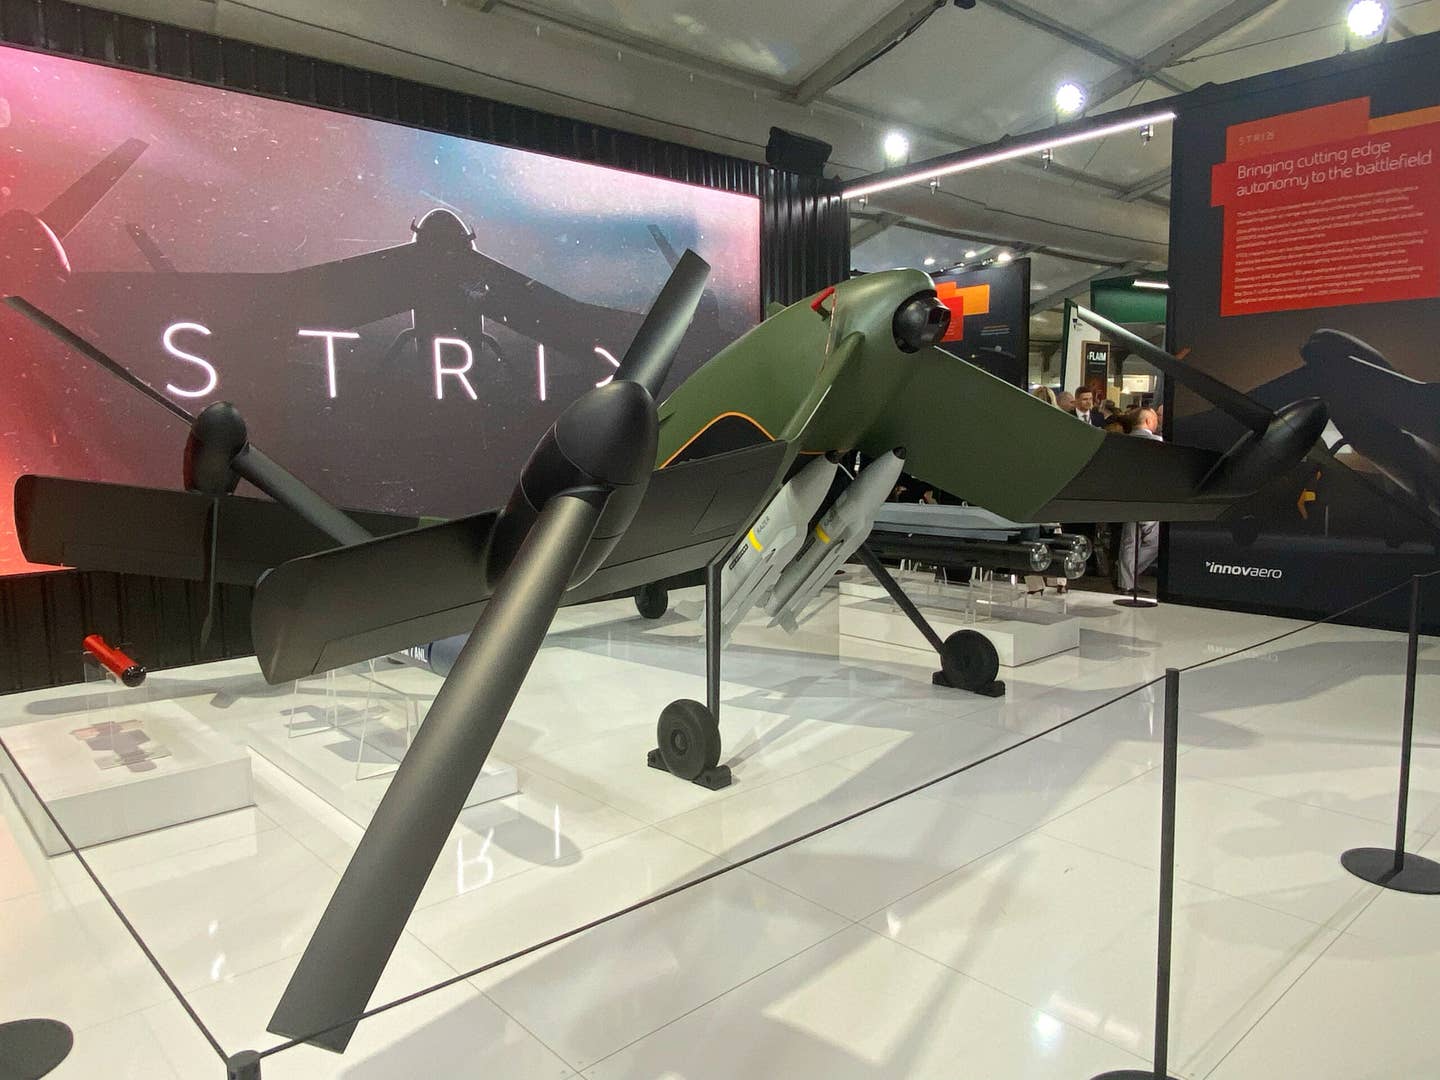 The STRIX mock-up at the BAE Australia booth during the Avalon Airshow. <em>Credit: Roy Choo</em>